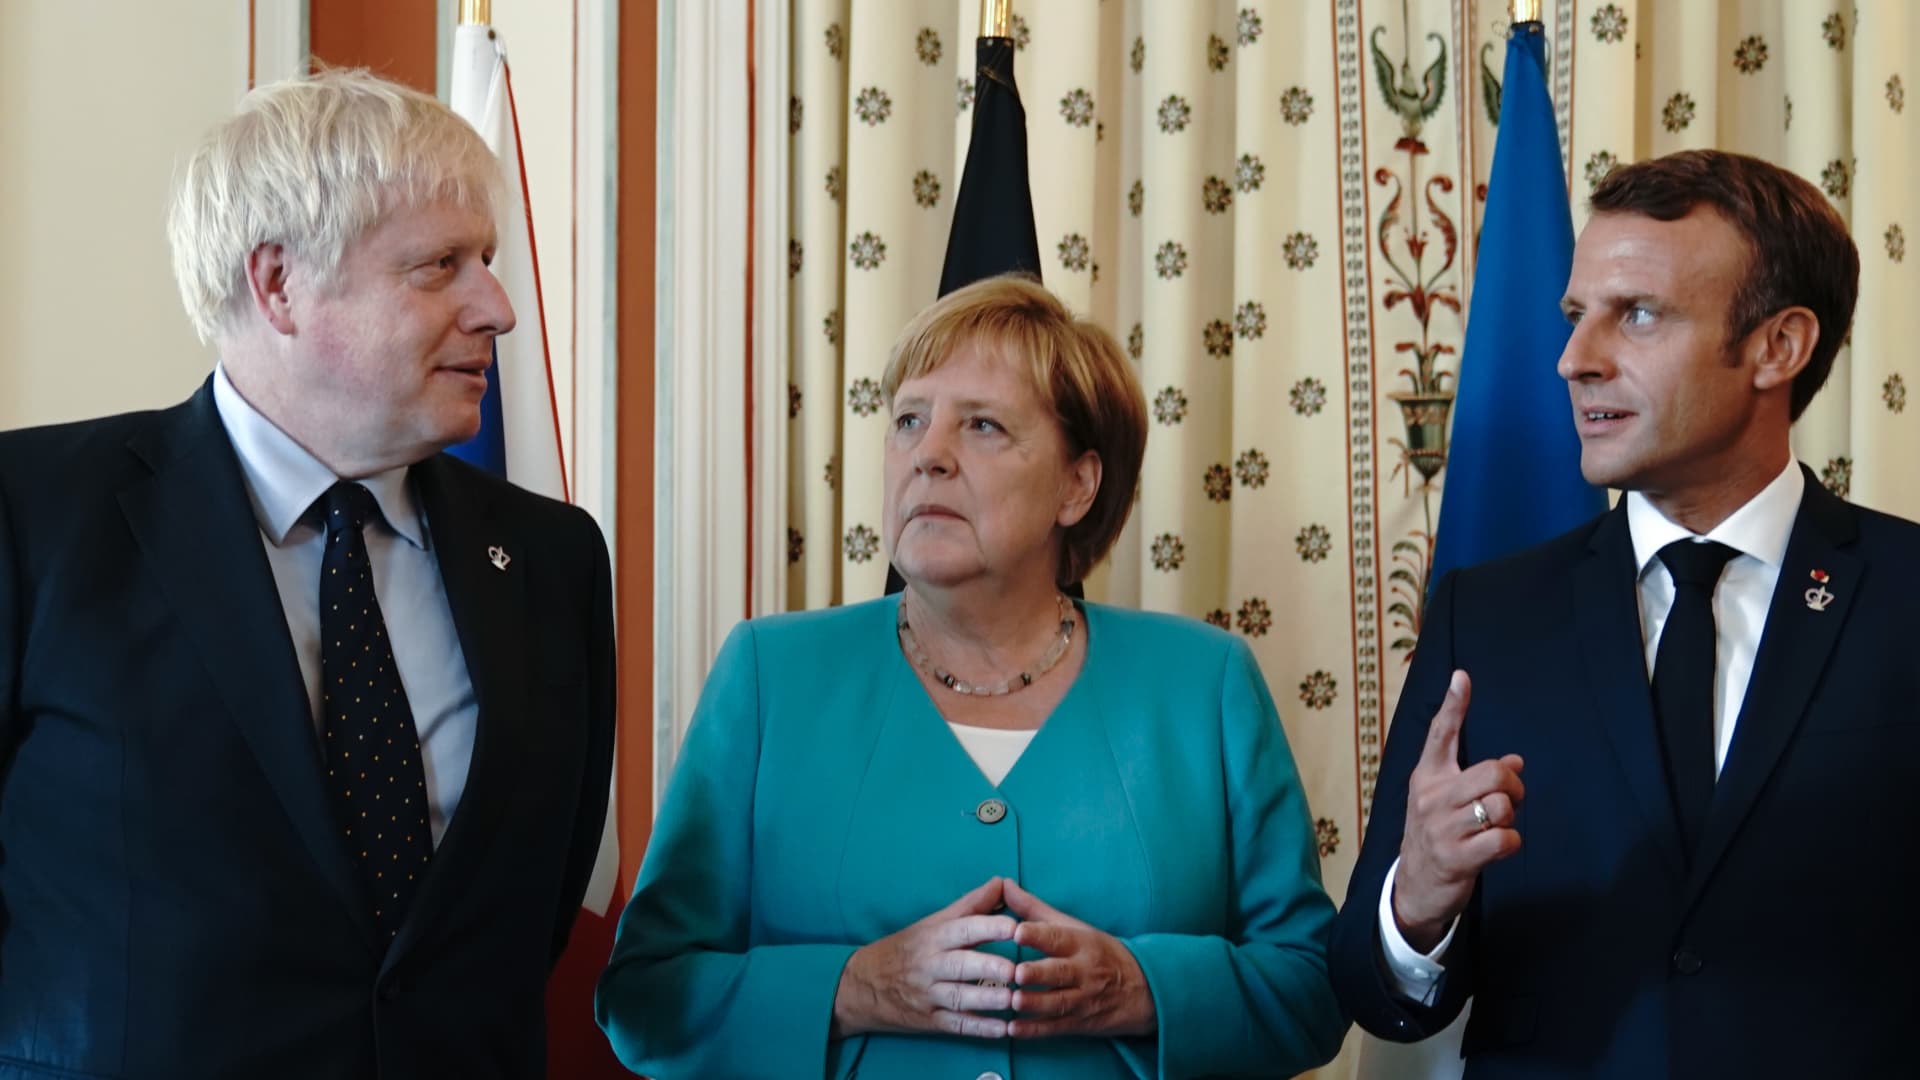 Chancellor Angela Merkel (CDU) stands between Boris Johnson (l), Prime Minister of Great Britain, and Emmanuel Macron, President of France, at the beginning of the summit.